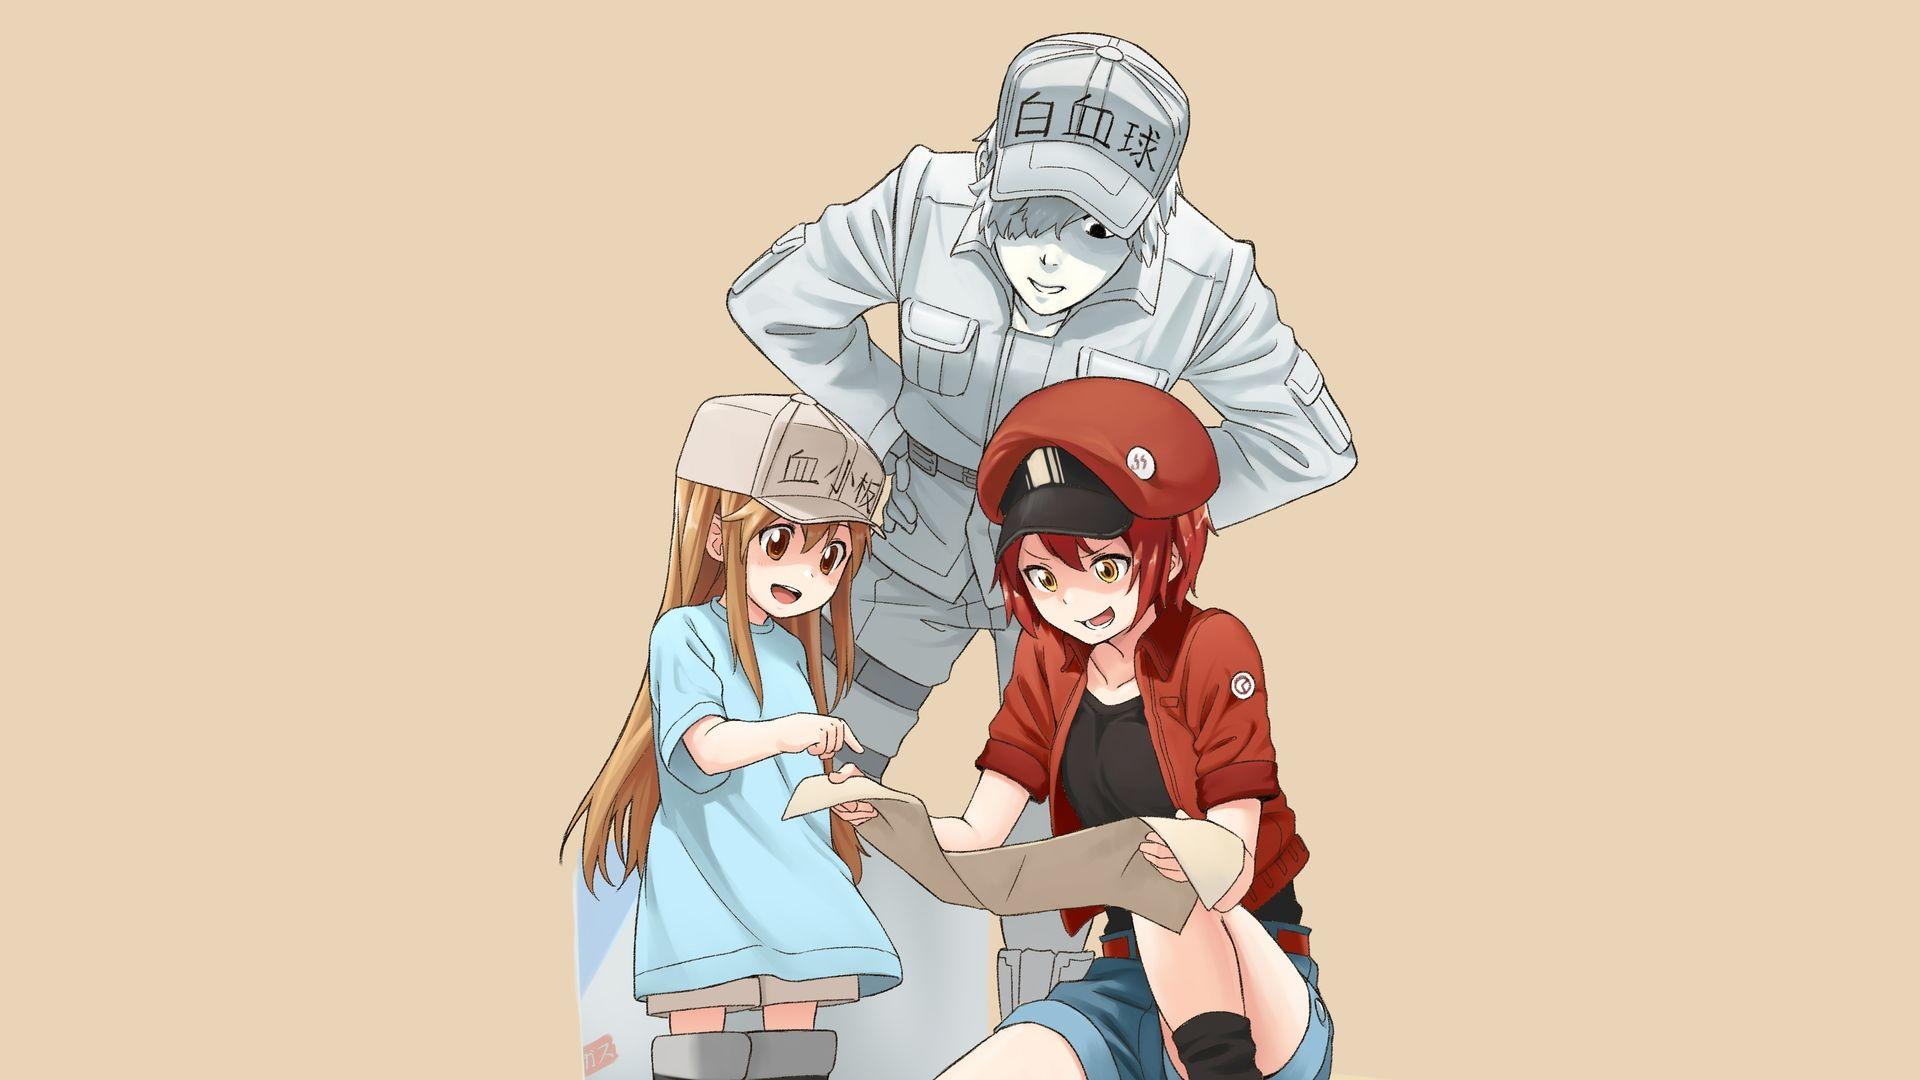 Anime Cells at Work! HD Wallpaper by つなまょ